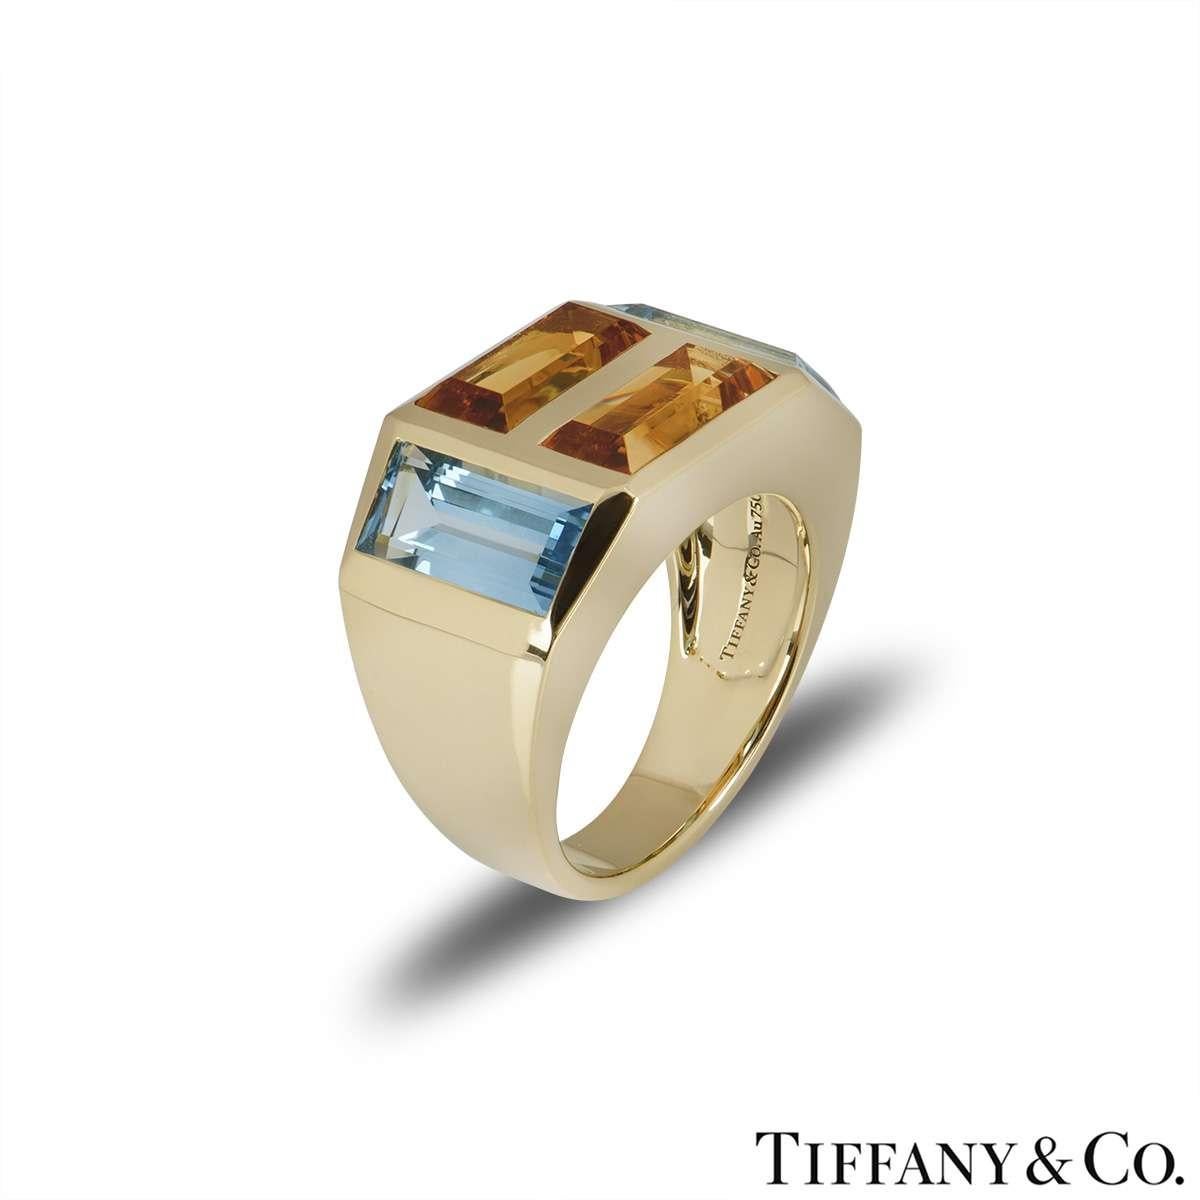 A beautiful 18k yellow gold dress ring from the Paloma Picasso collection by Tiffany & Co. The ring is set with two emerald cut citrine's set horizontally and two emerald cut blue topaz stones set vertically on either side. The citrine's have a